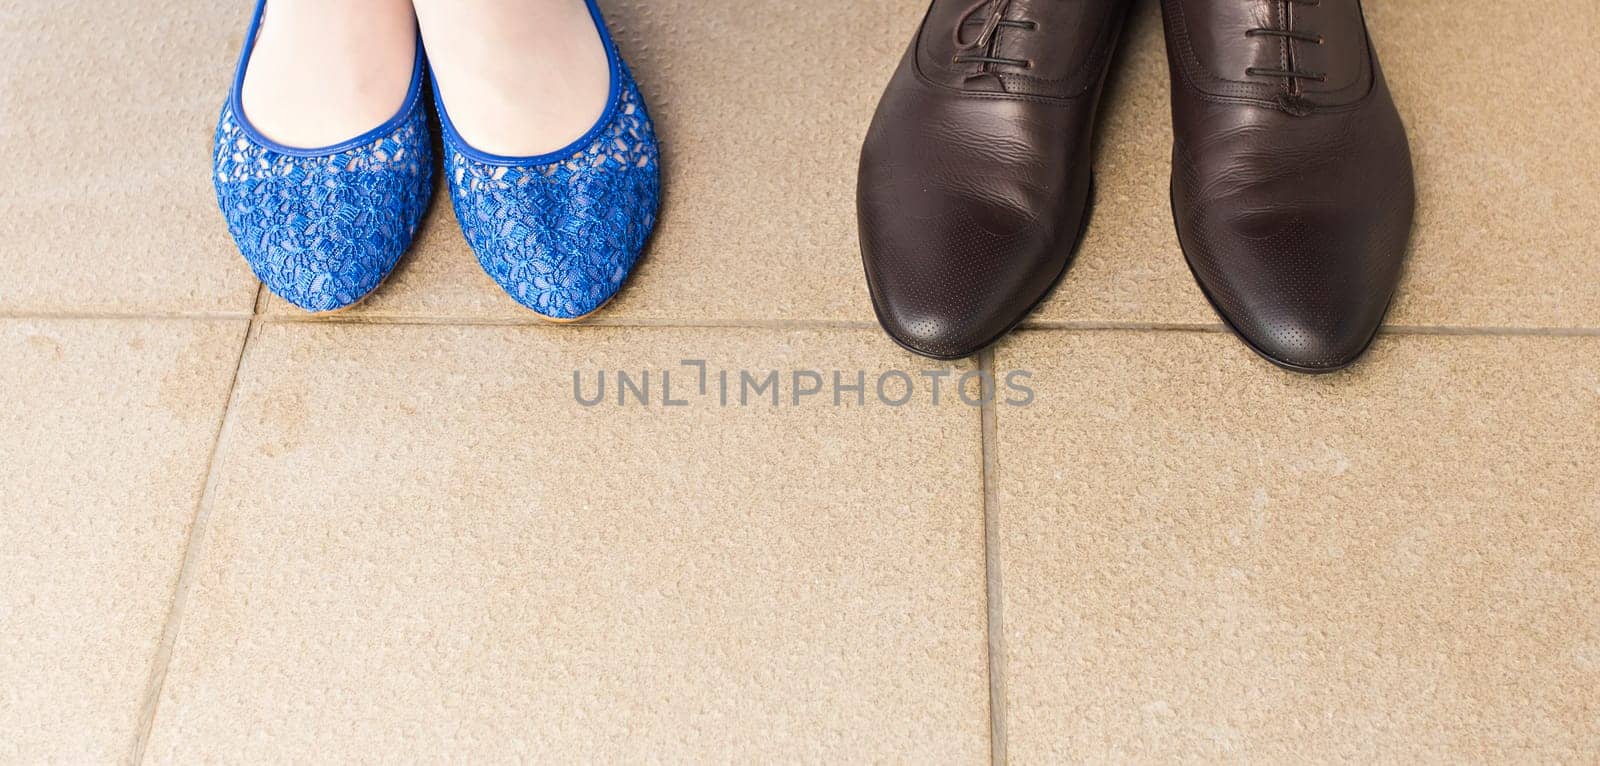 Man and woman shoes by Satura86